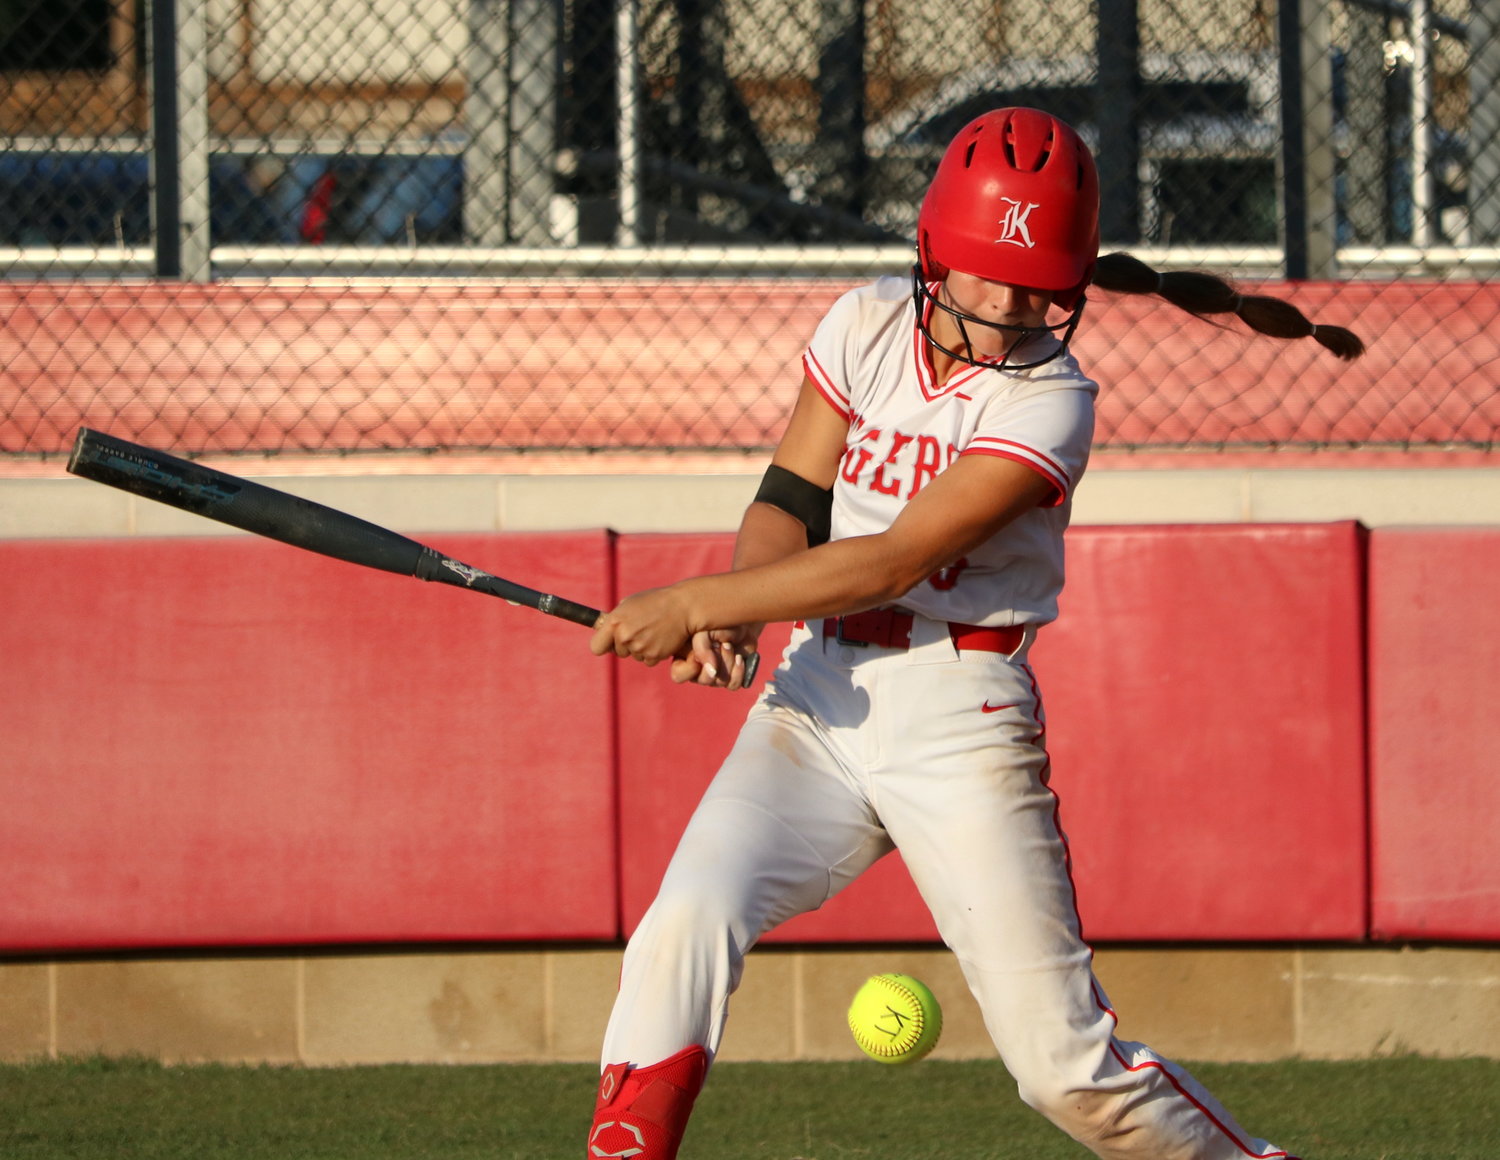 Kailey Wyckoff hits during Wednesday’s Class 6A Regional Semifinal game between Katy and Pearland at the Katy softball field.